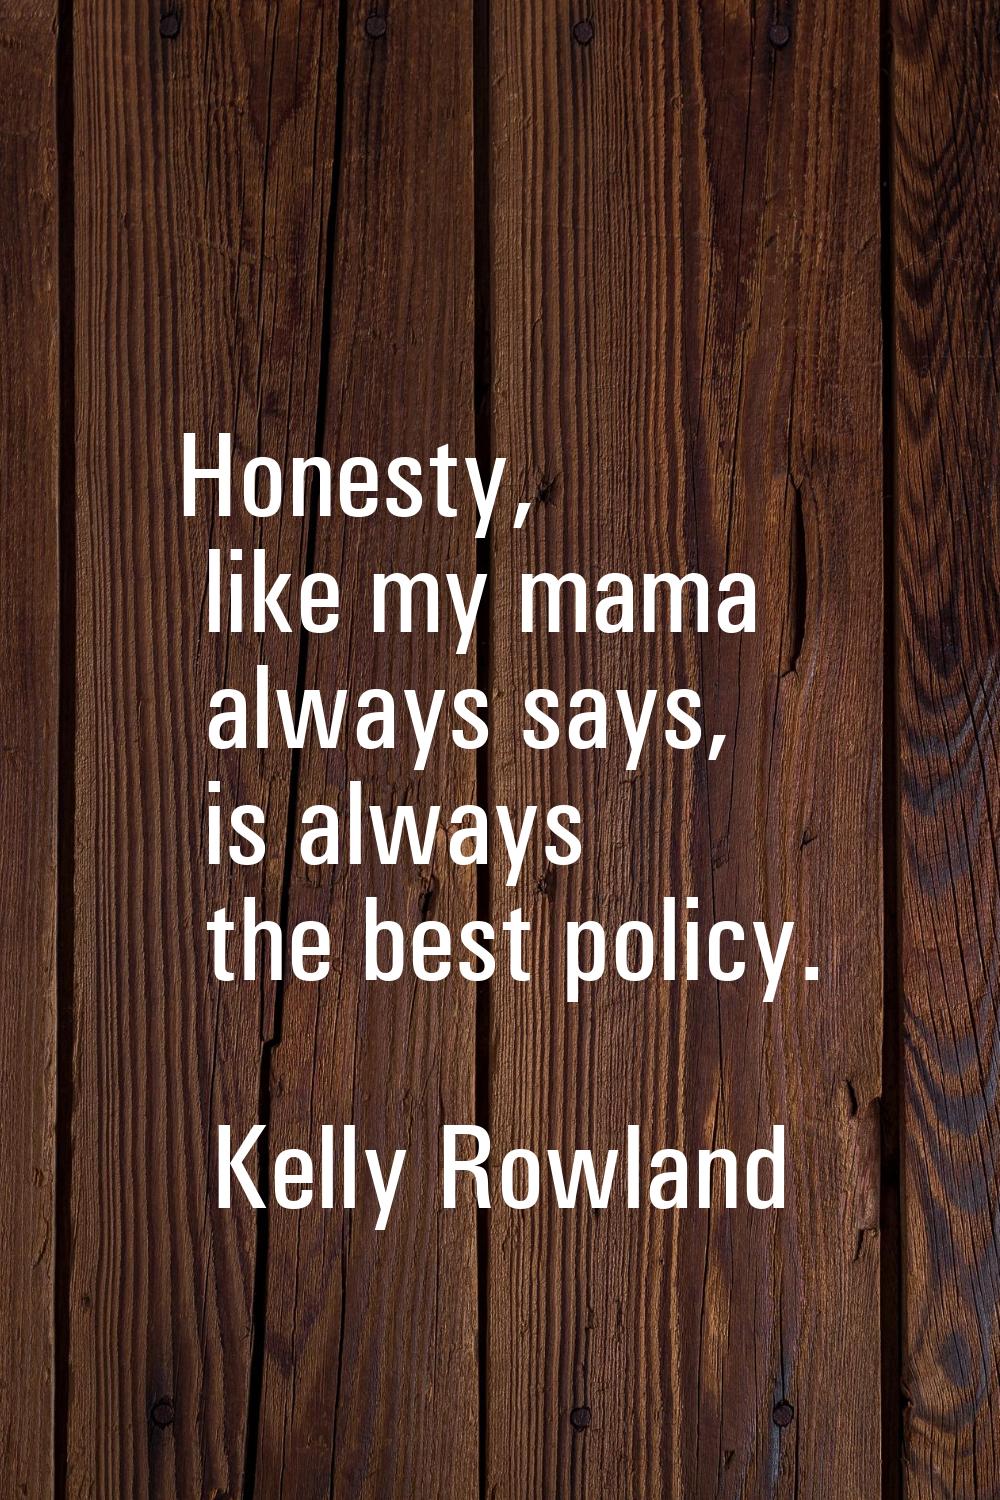 Honesty, like my mama always says, is always the best policy.